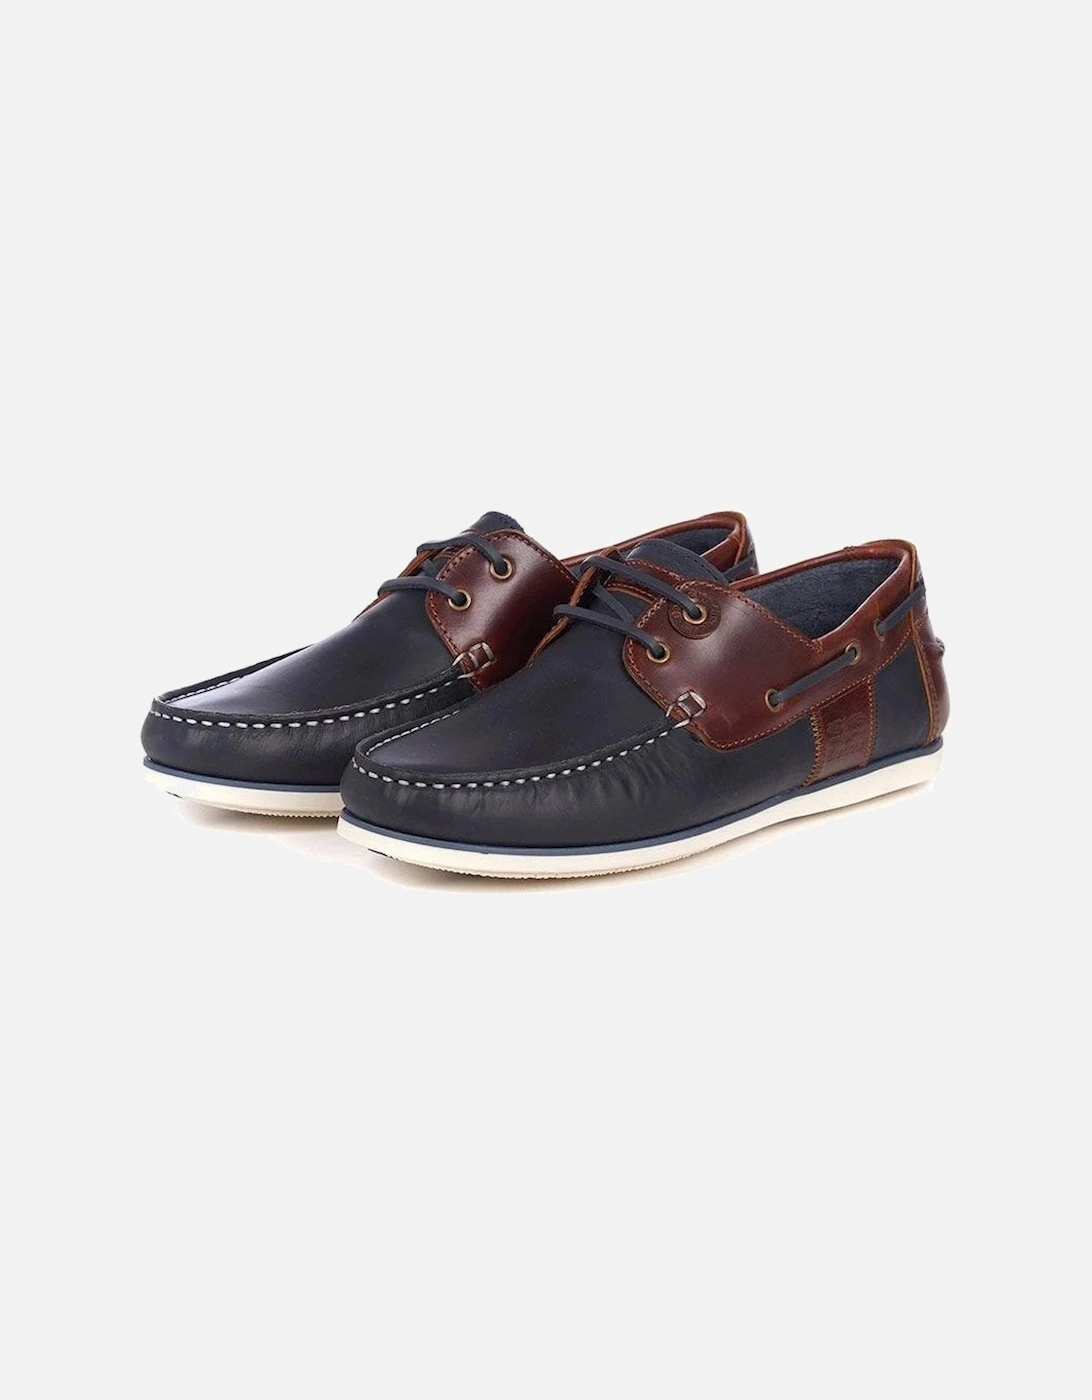 Barbour Men's Navy/ Brown Wake Boat Shoes